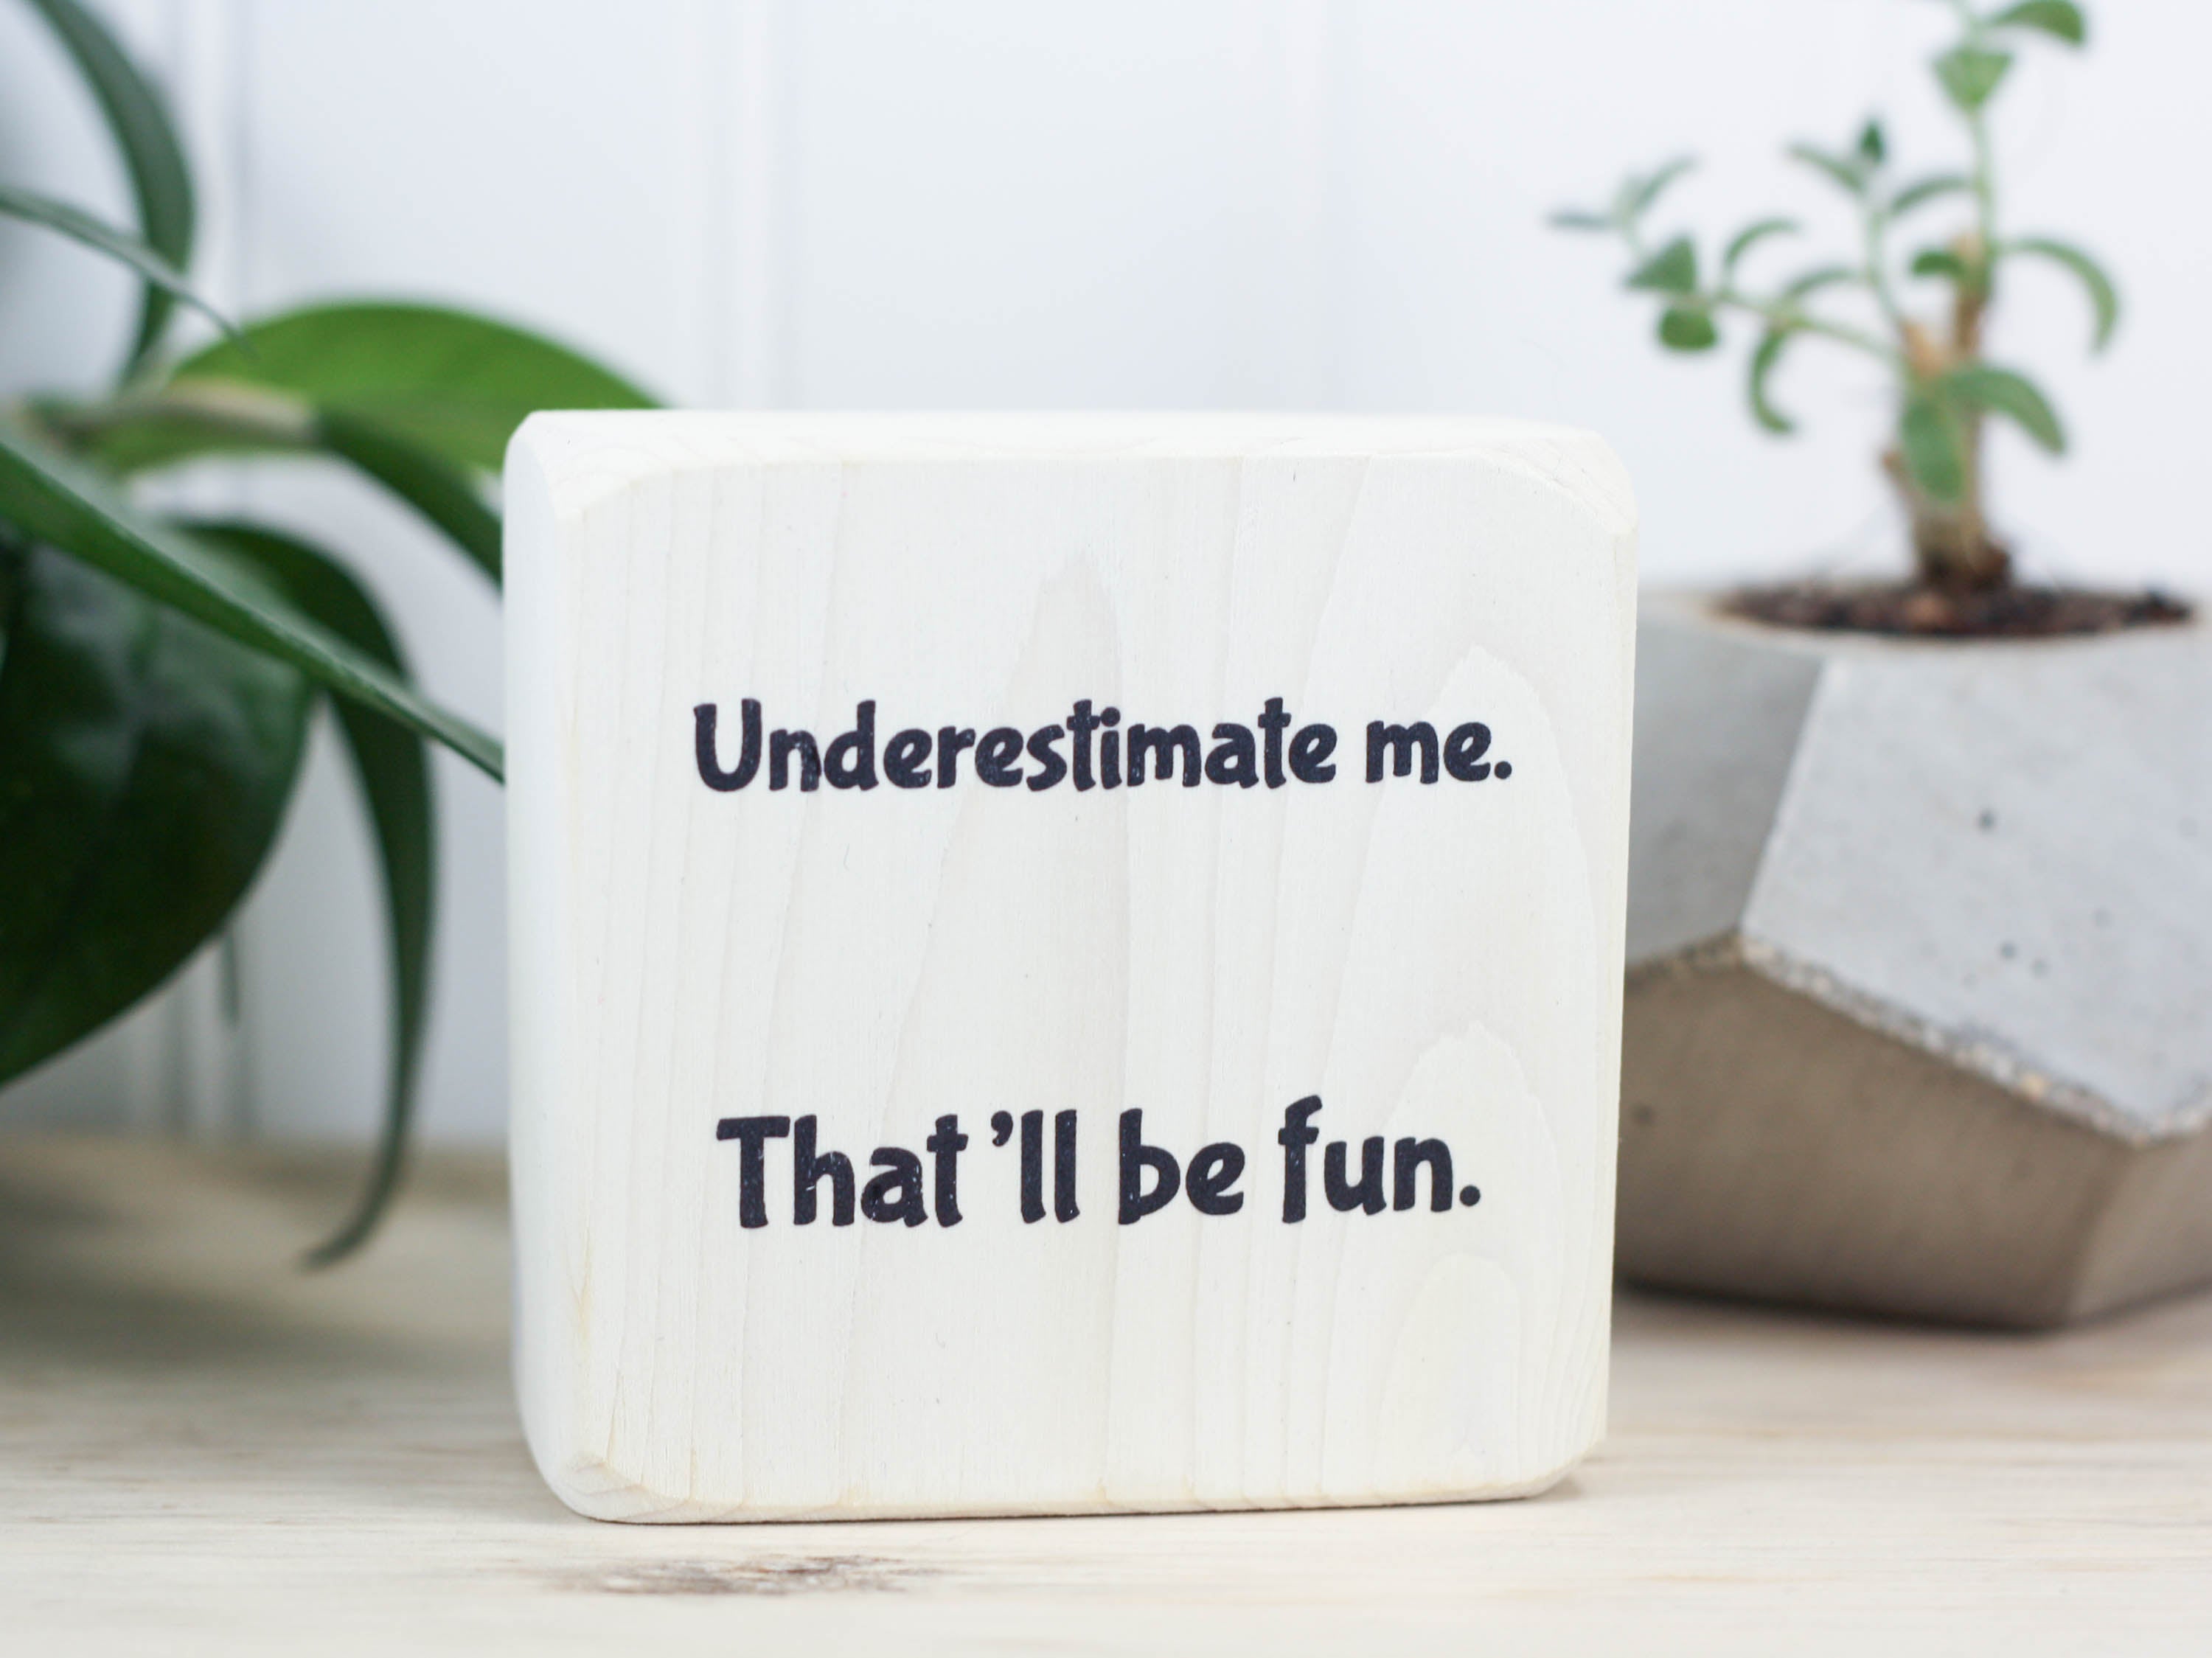 Small wood block sign in whitewash with the saying "Underestimate me. That'll be fun."